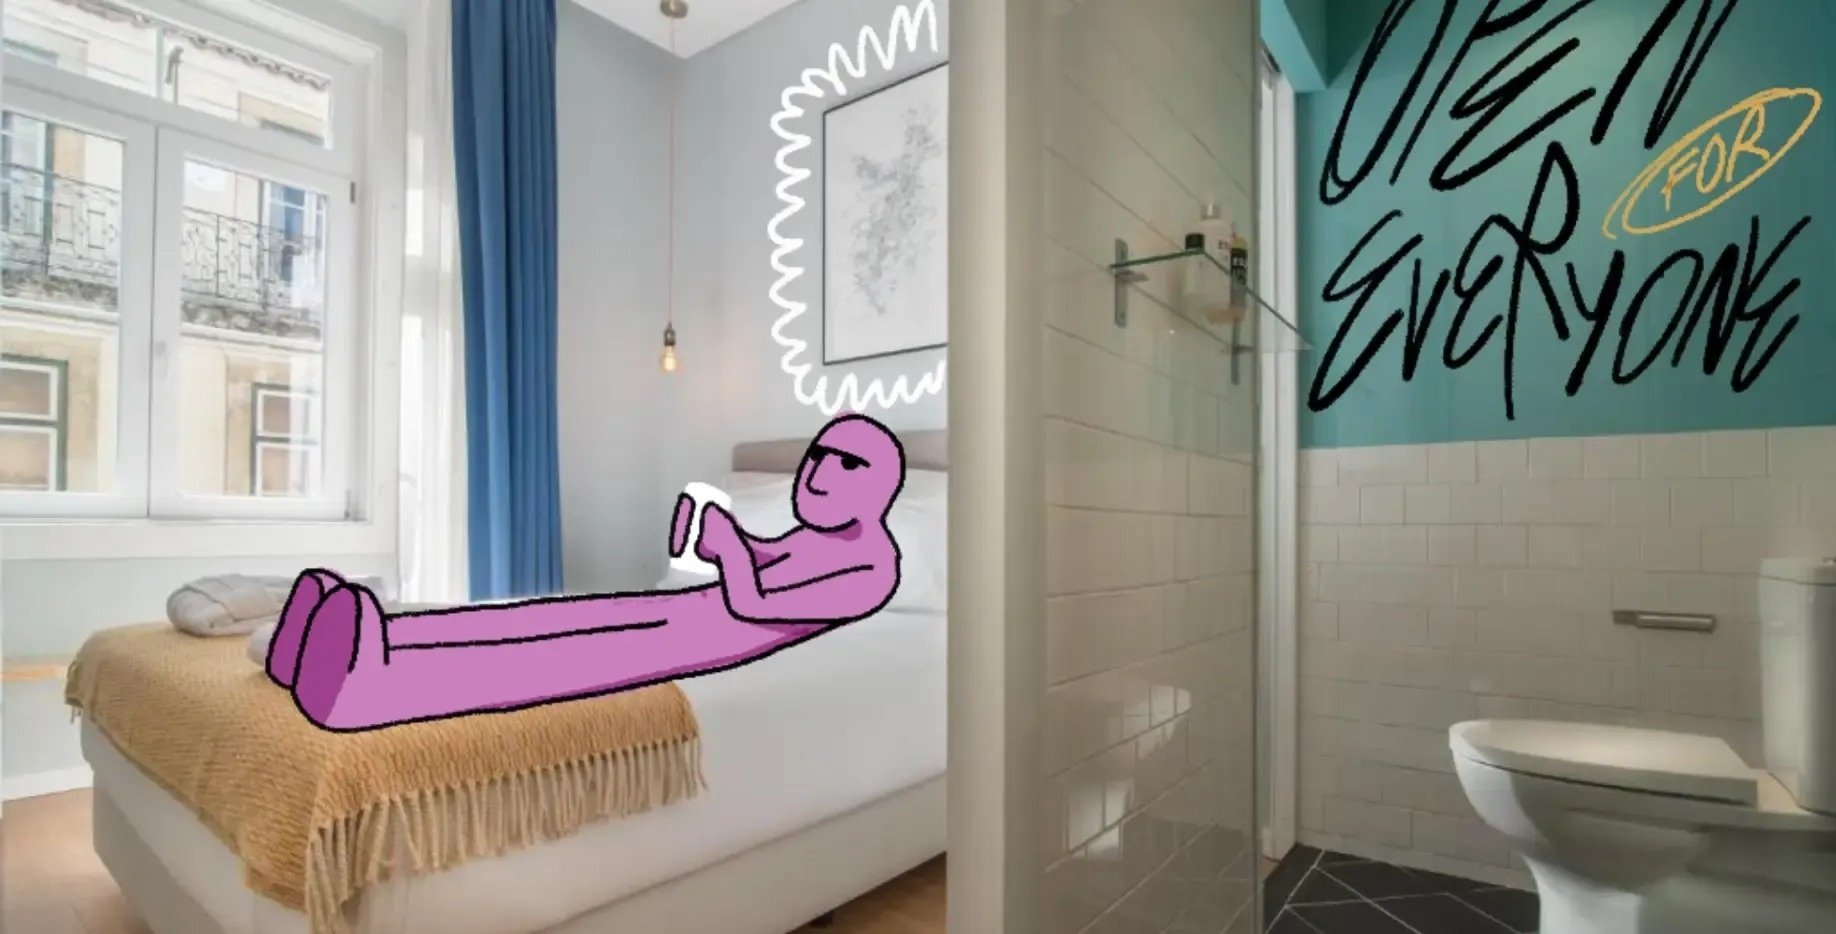 a drawing of a person laying on a bed next to a bathroom that says open to everyone